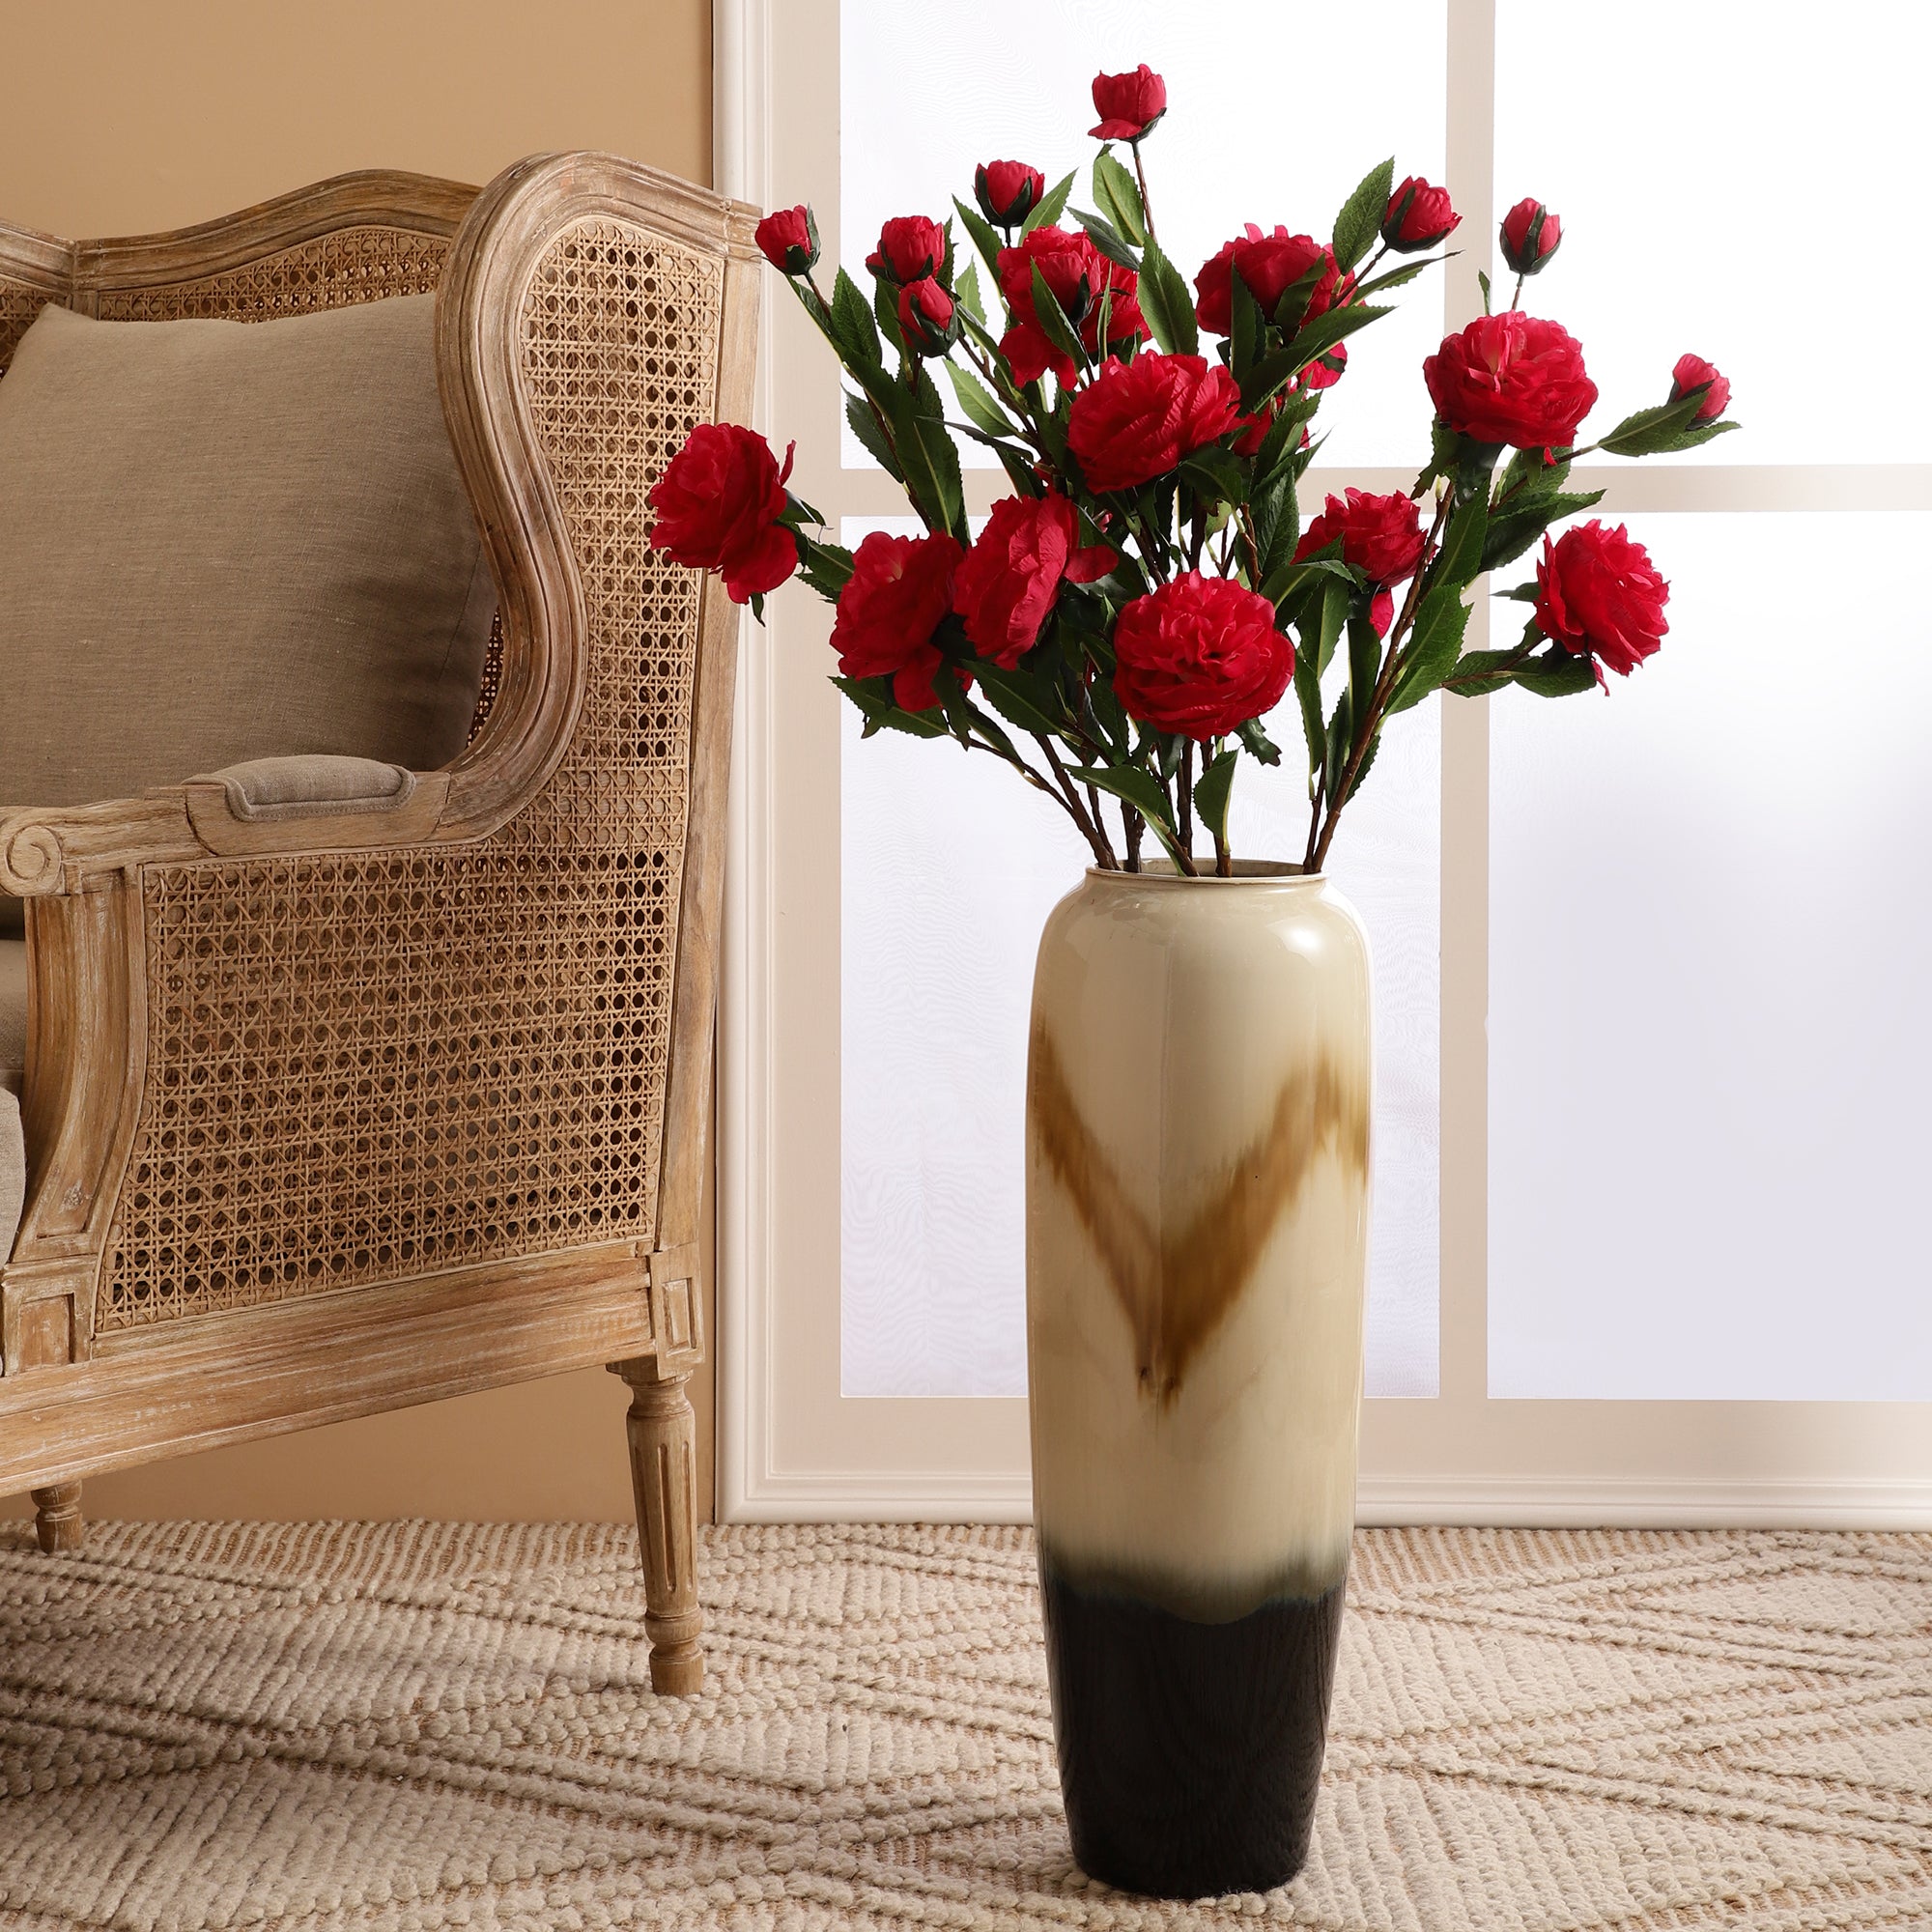 Red Rose Faux Flower Stick (Single)